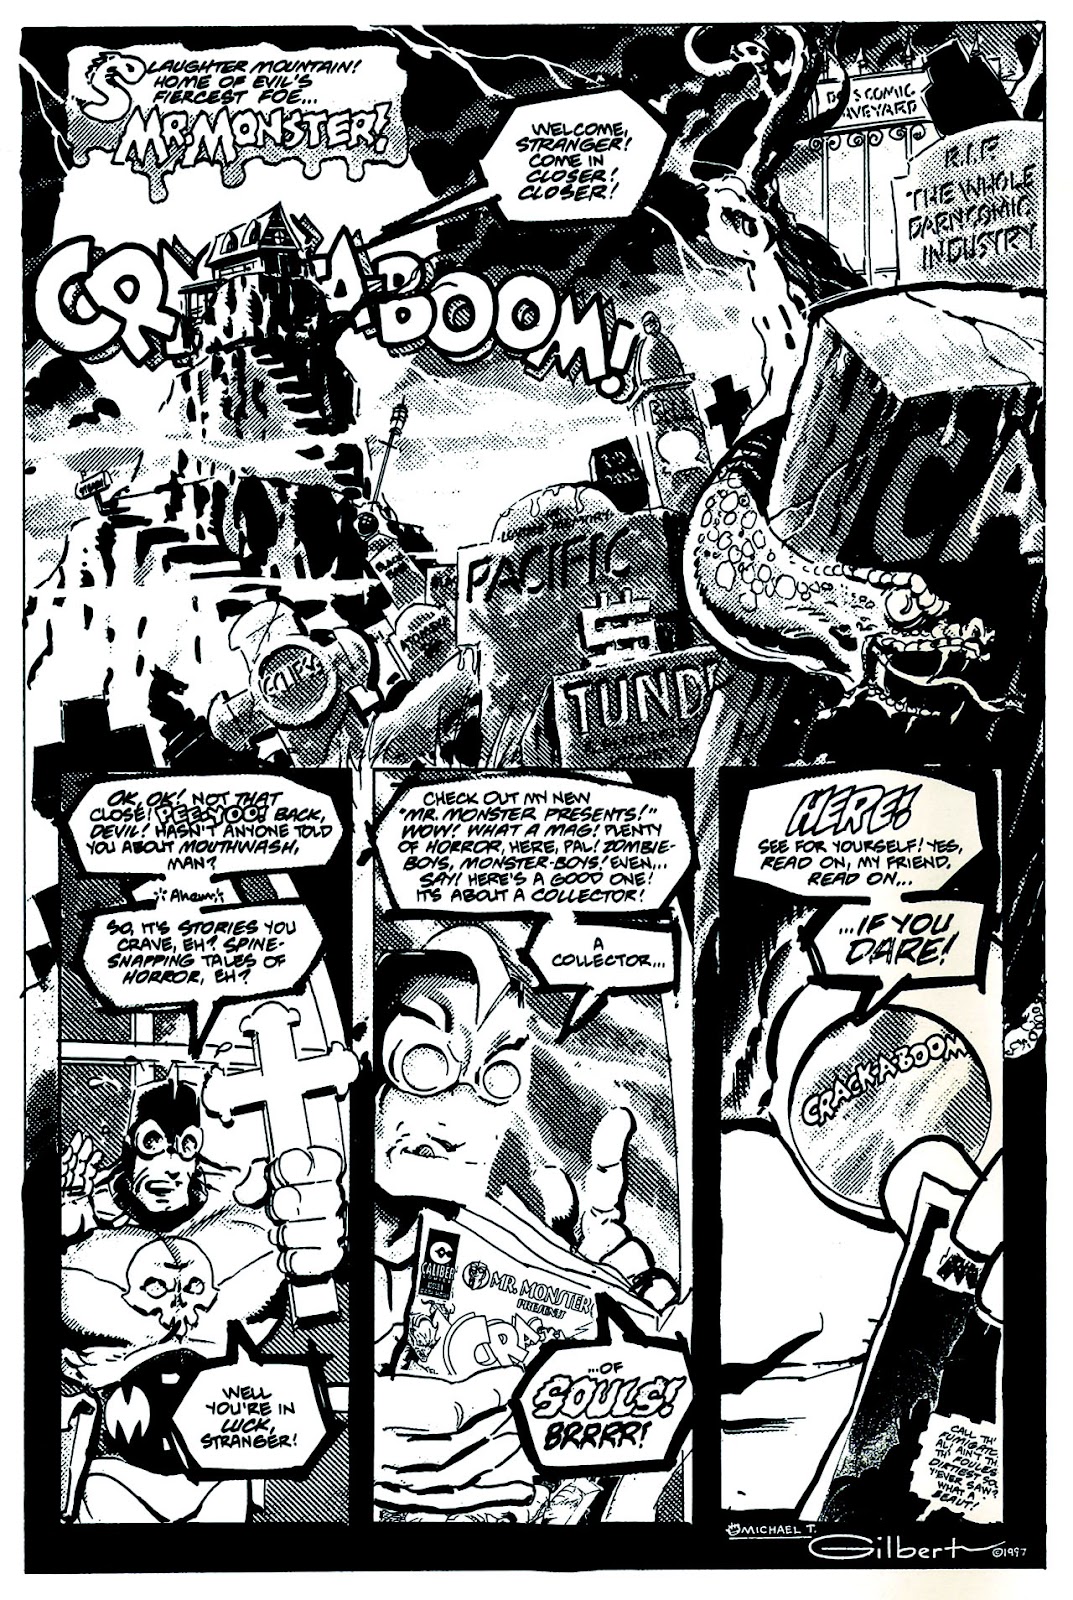 Mr. Monster Presents: (crack-a-boom) issue 1 - Page 3